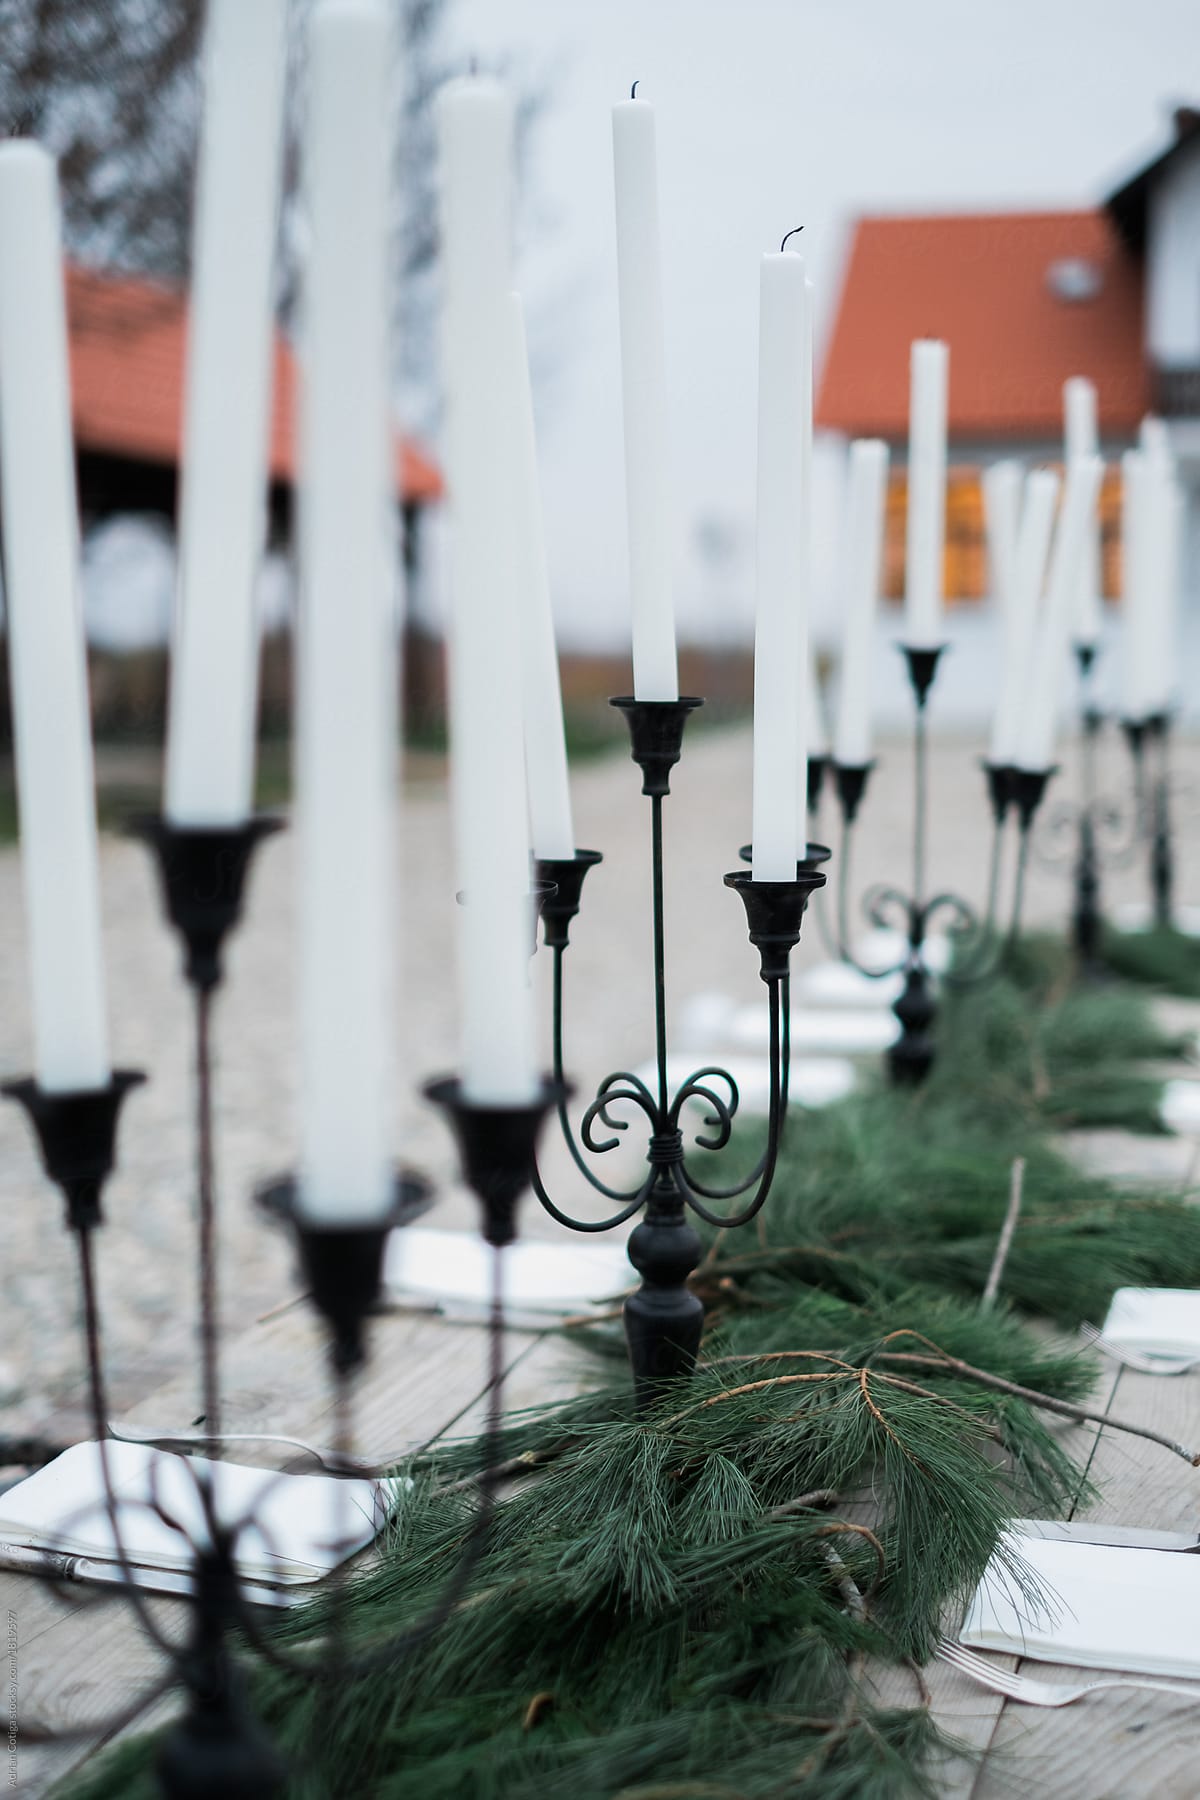 Outdoor table set-up for an outdoor meal with candles and pine branches